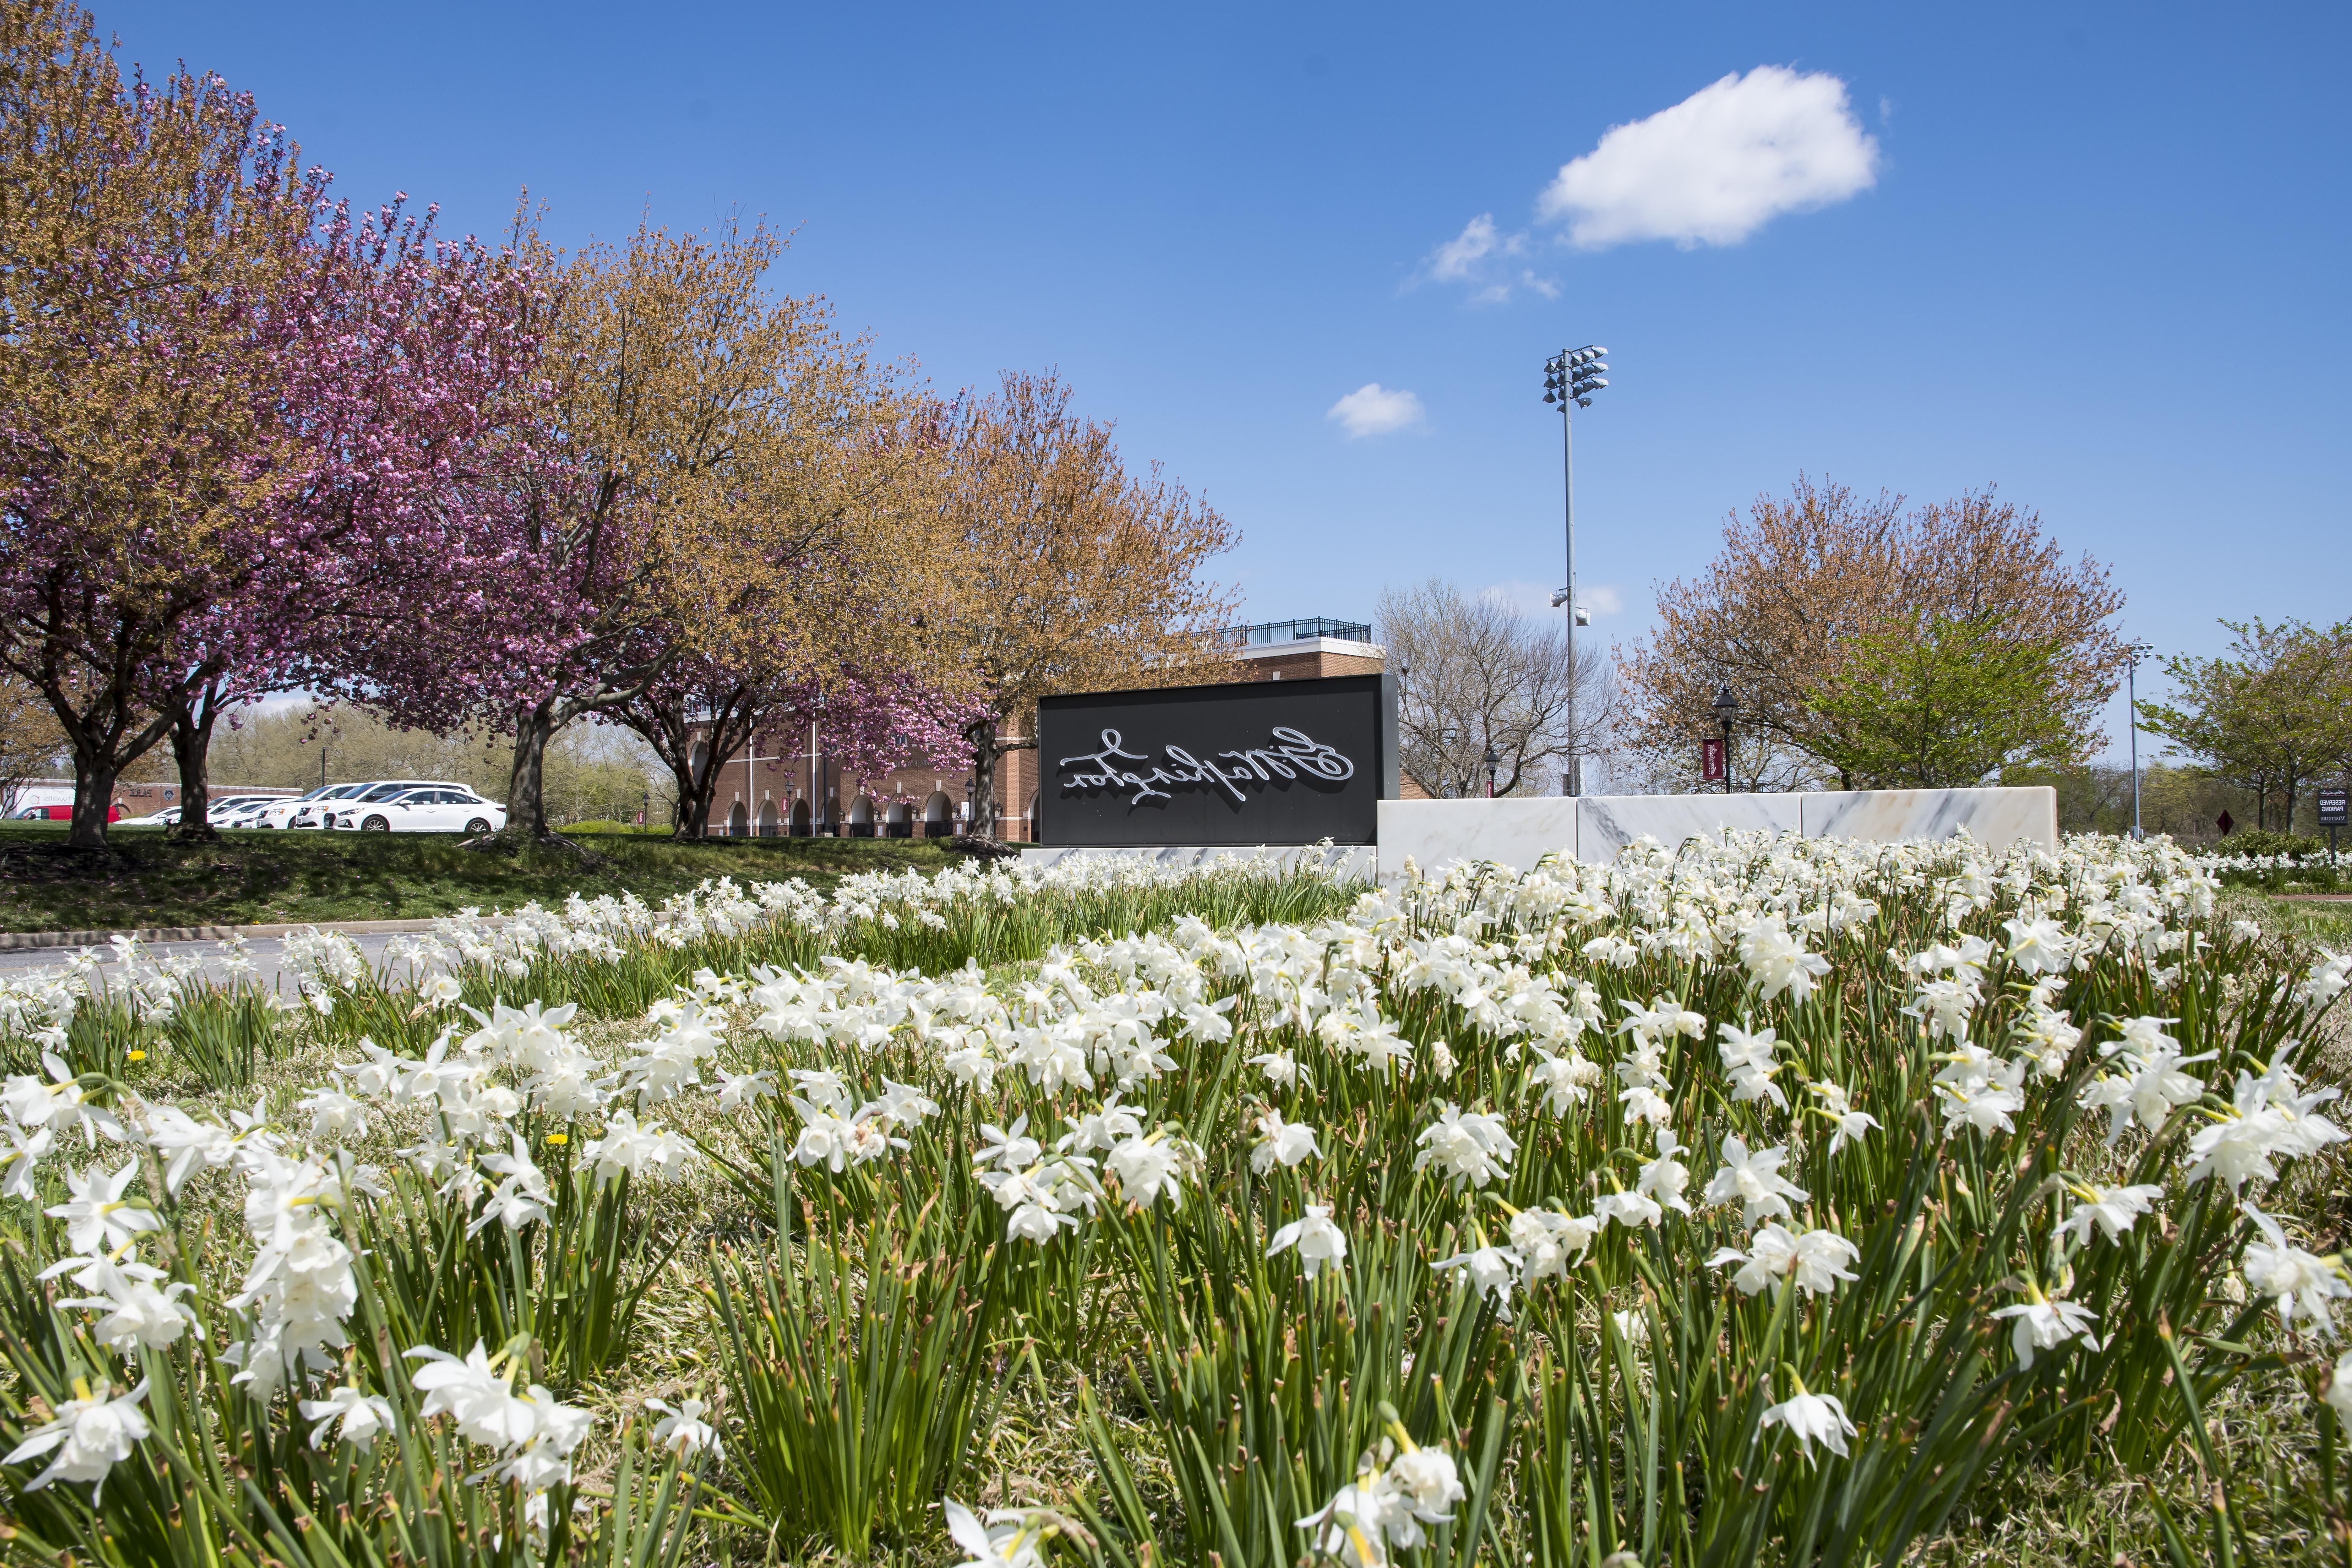 A Washington College sign sits in a patch of white flowers